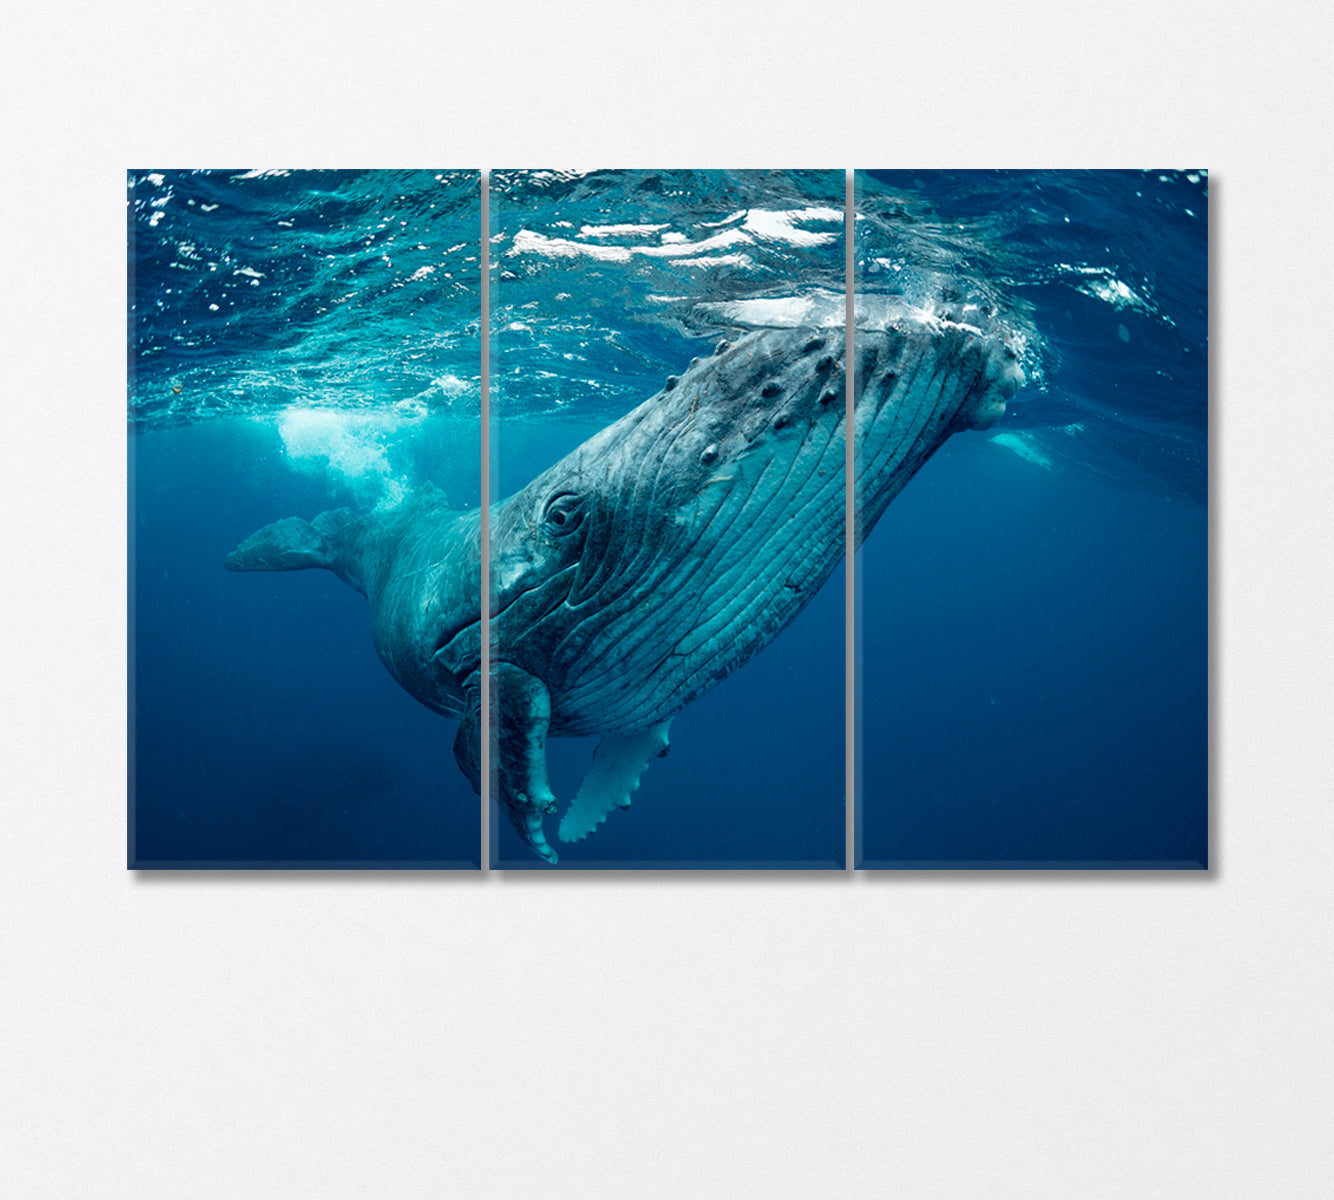 Whale Swimming in the Pacific Ocean Canvas Print-Canvas Print-CetArt-3 Panels-36x24 inches-CetArt